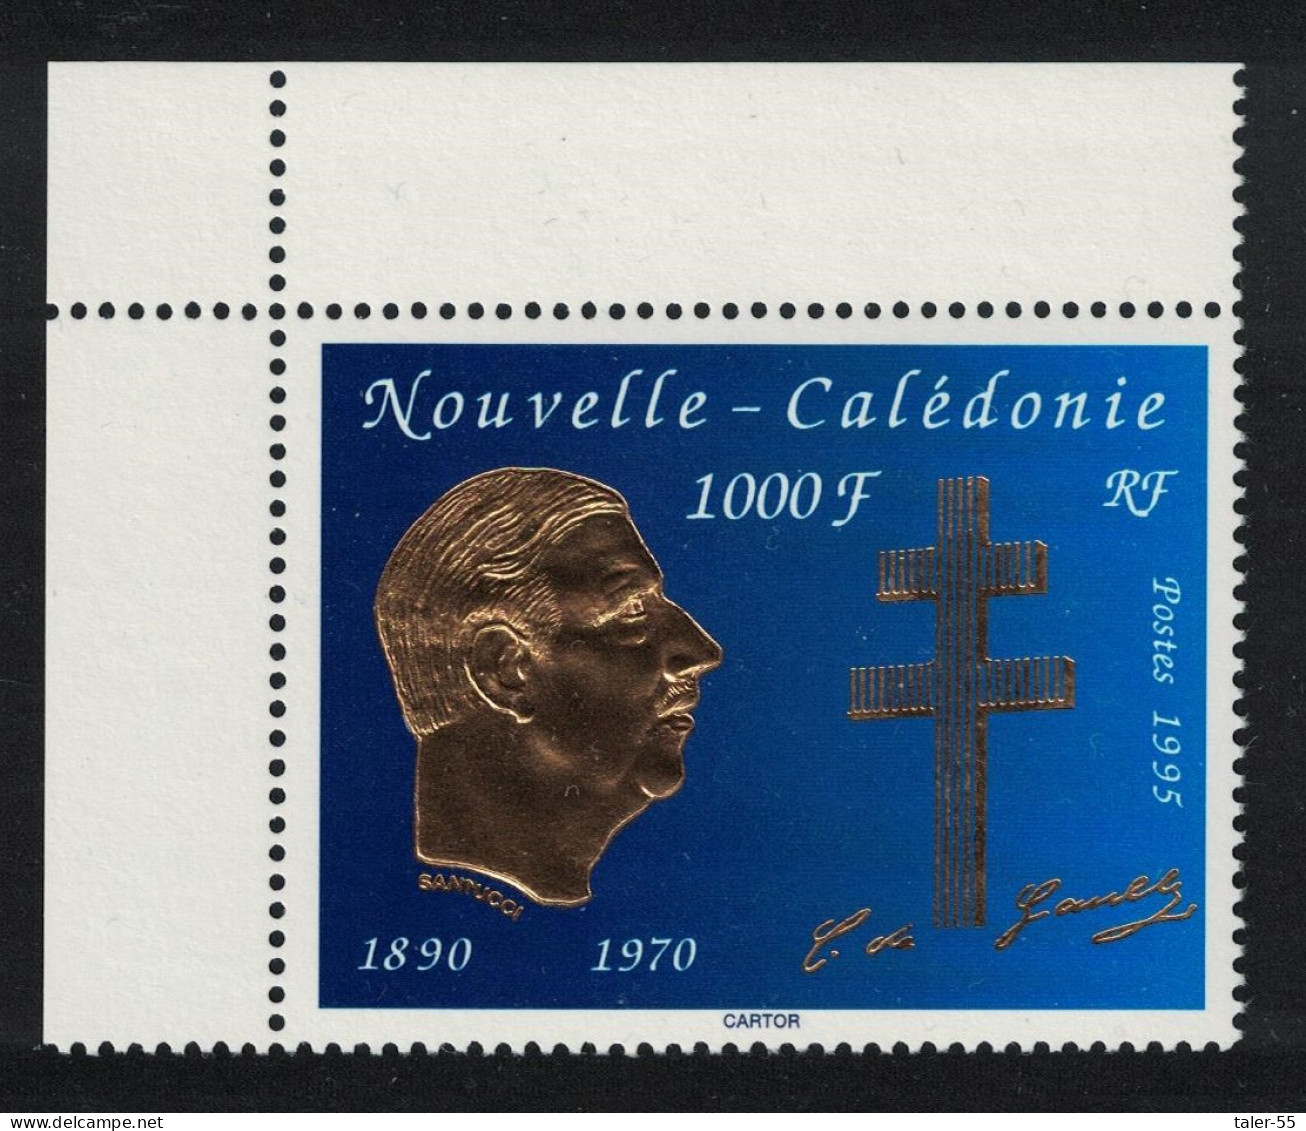 New Caledonia 25th Death Anniversary Of Charles De Gaulle T1 Corner 1995 MNH SG#1032 - Neufs